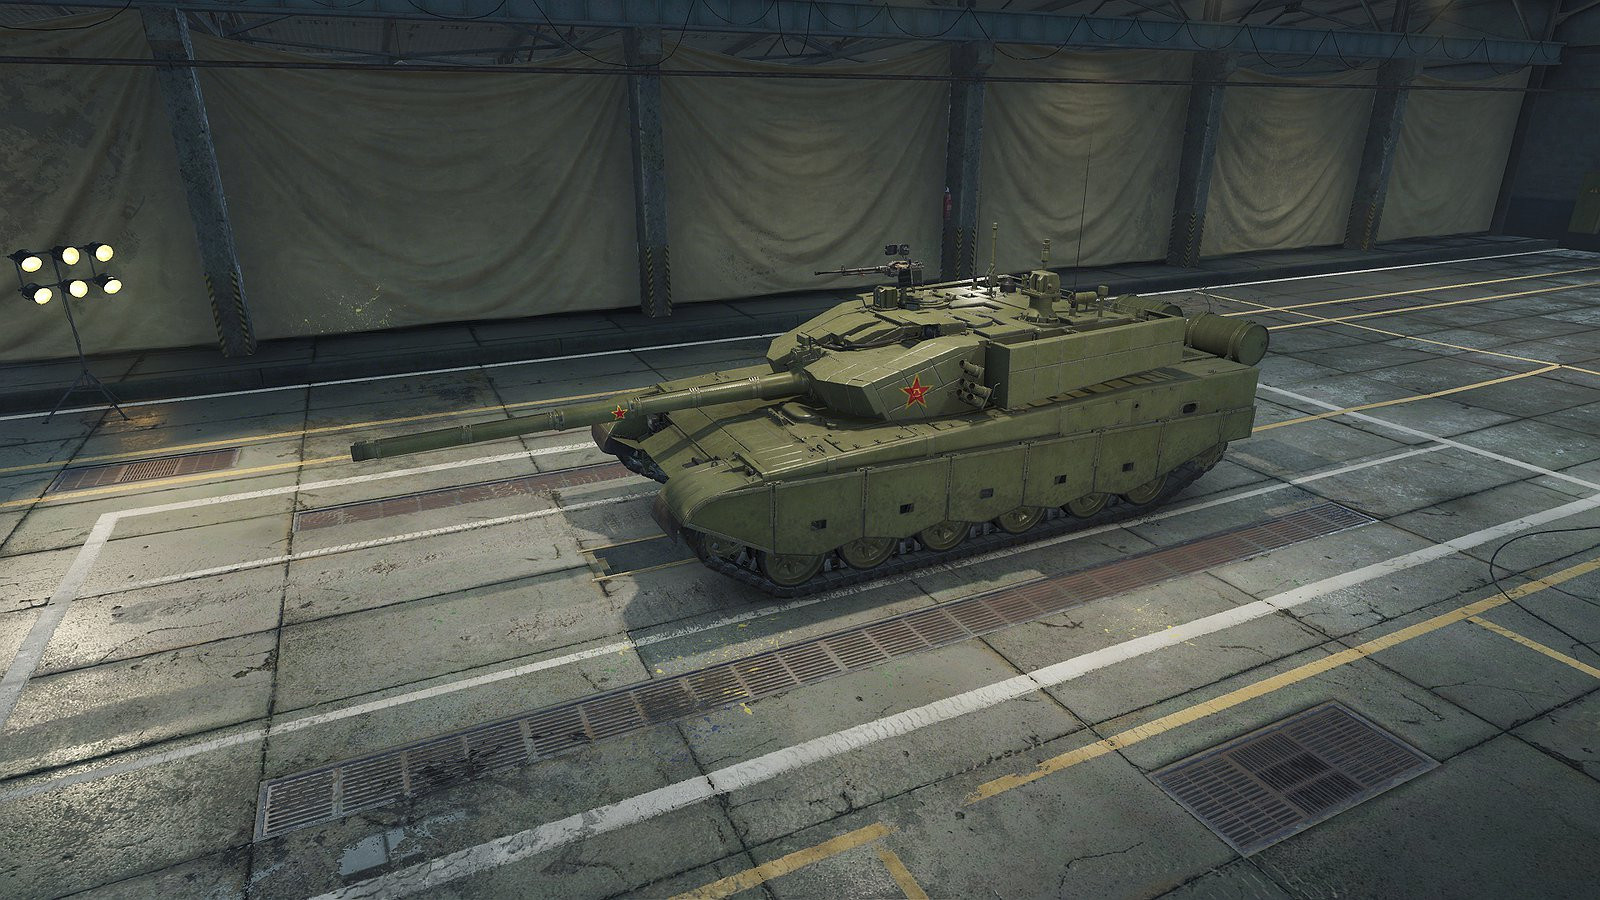 [UML] ZTZ99A (Type-99A) Replace Any Tanks